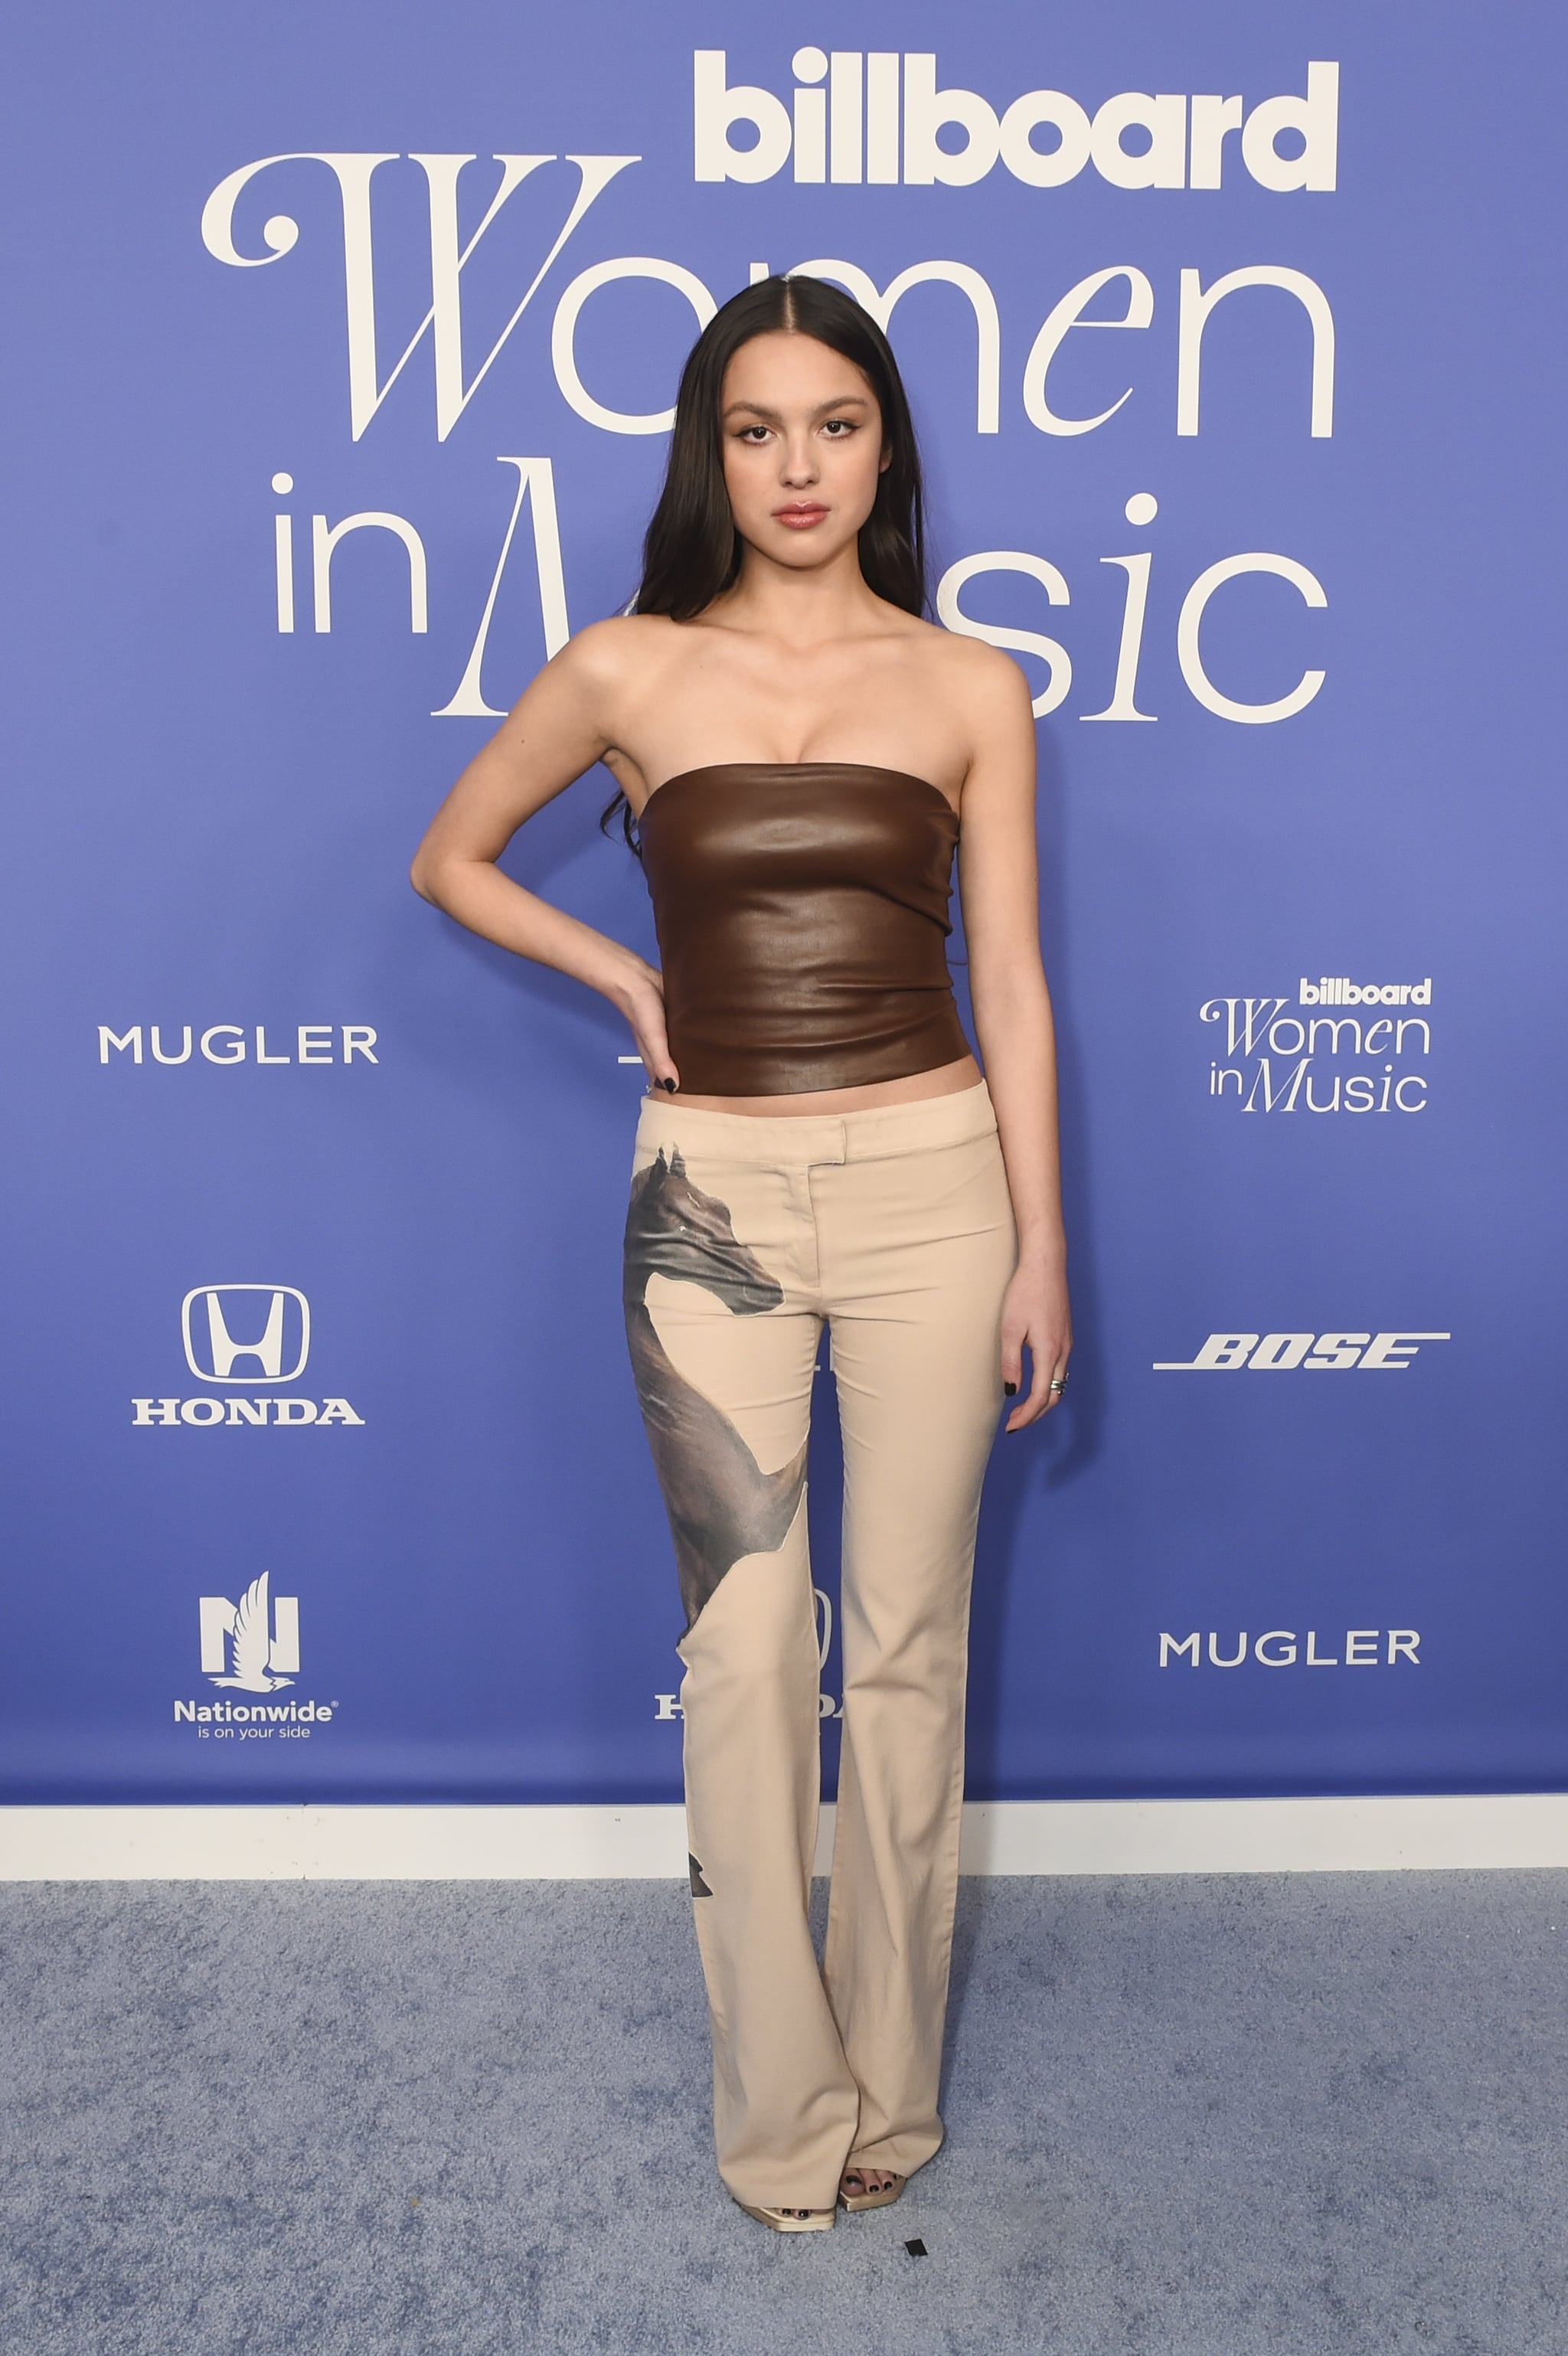 Olivia Rodrigo at Billboard Women In Music held at YouTube Theater on March 1, 2023 in Los Angeles, California. (Photo by Gilbert Flores/Billboard via Getty Images)